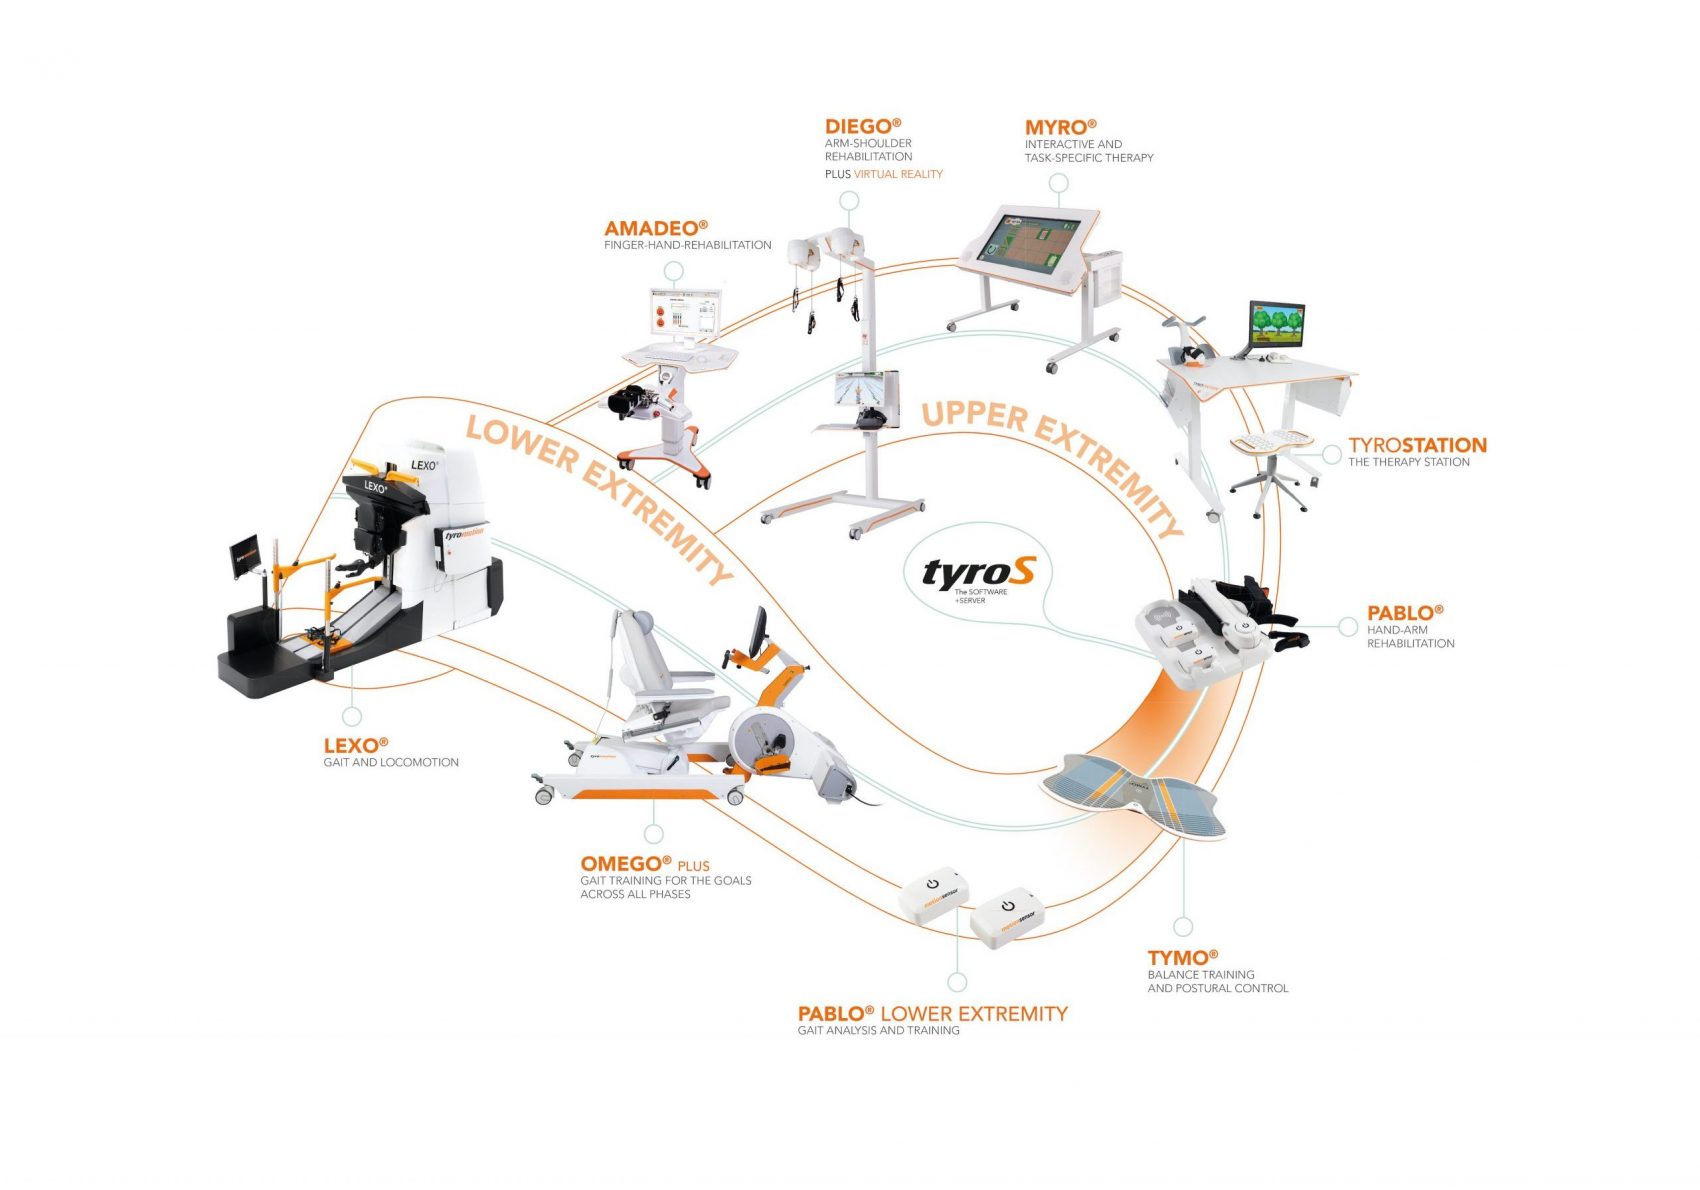 The TyroLoop shows the entire product range of Tyromotion